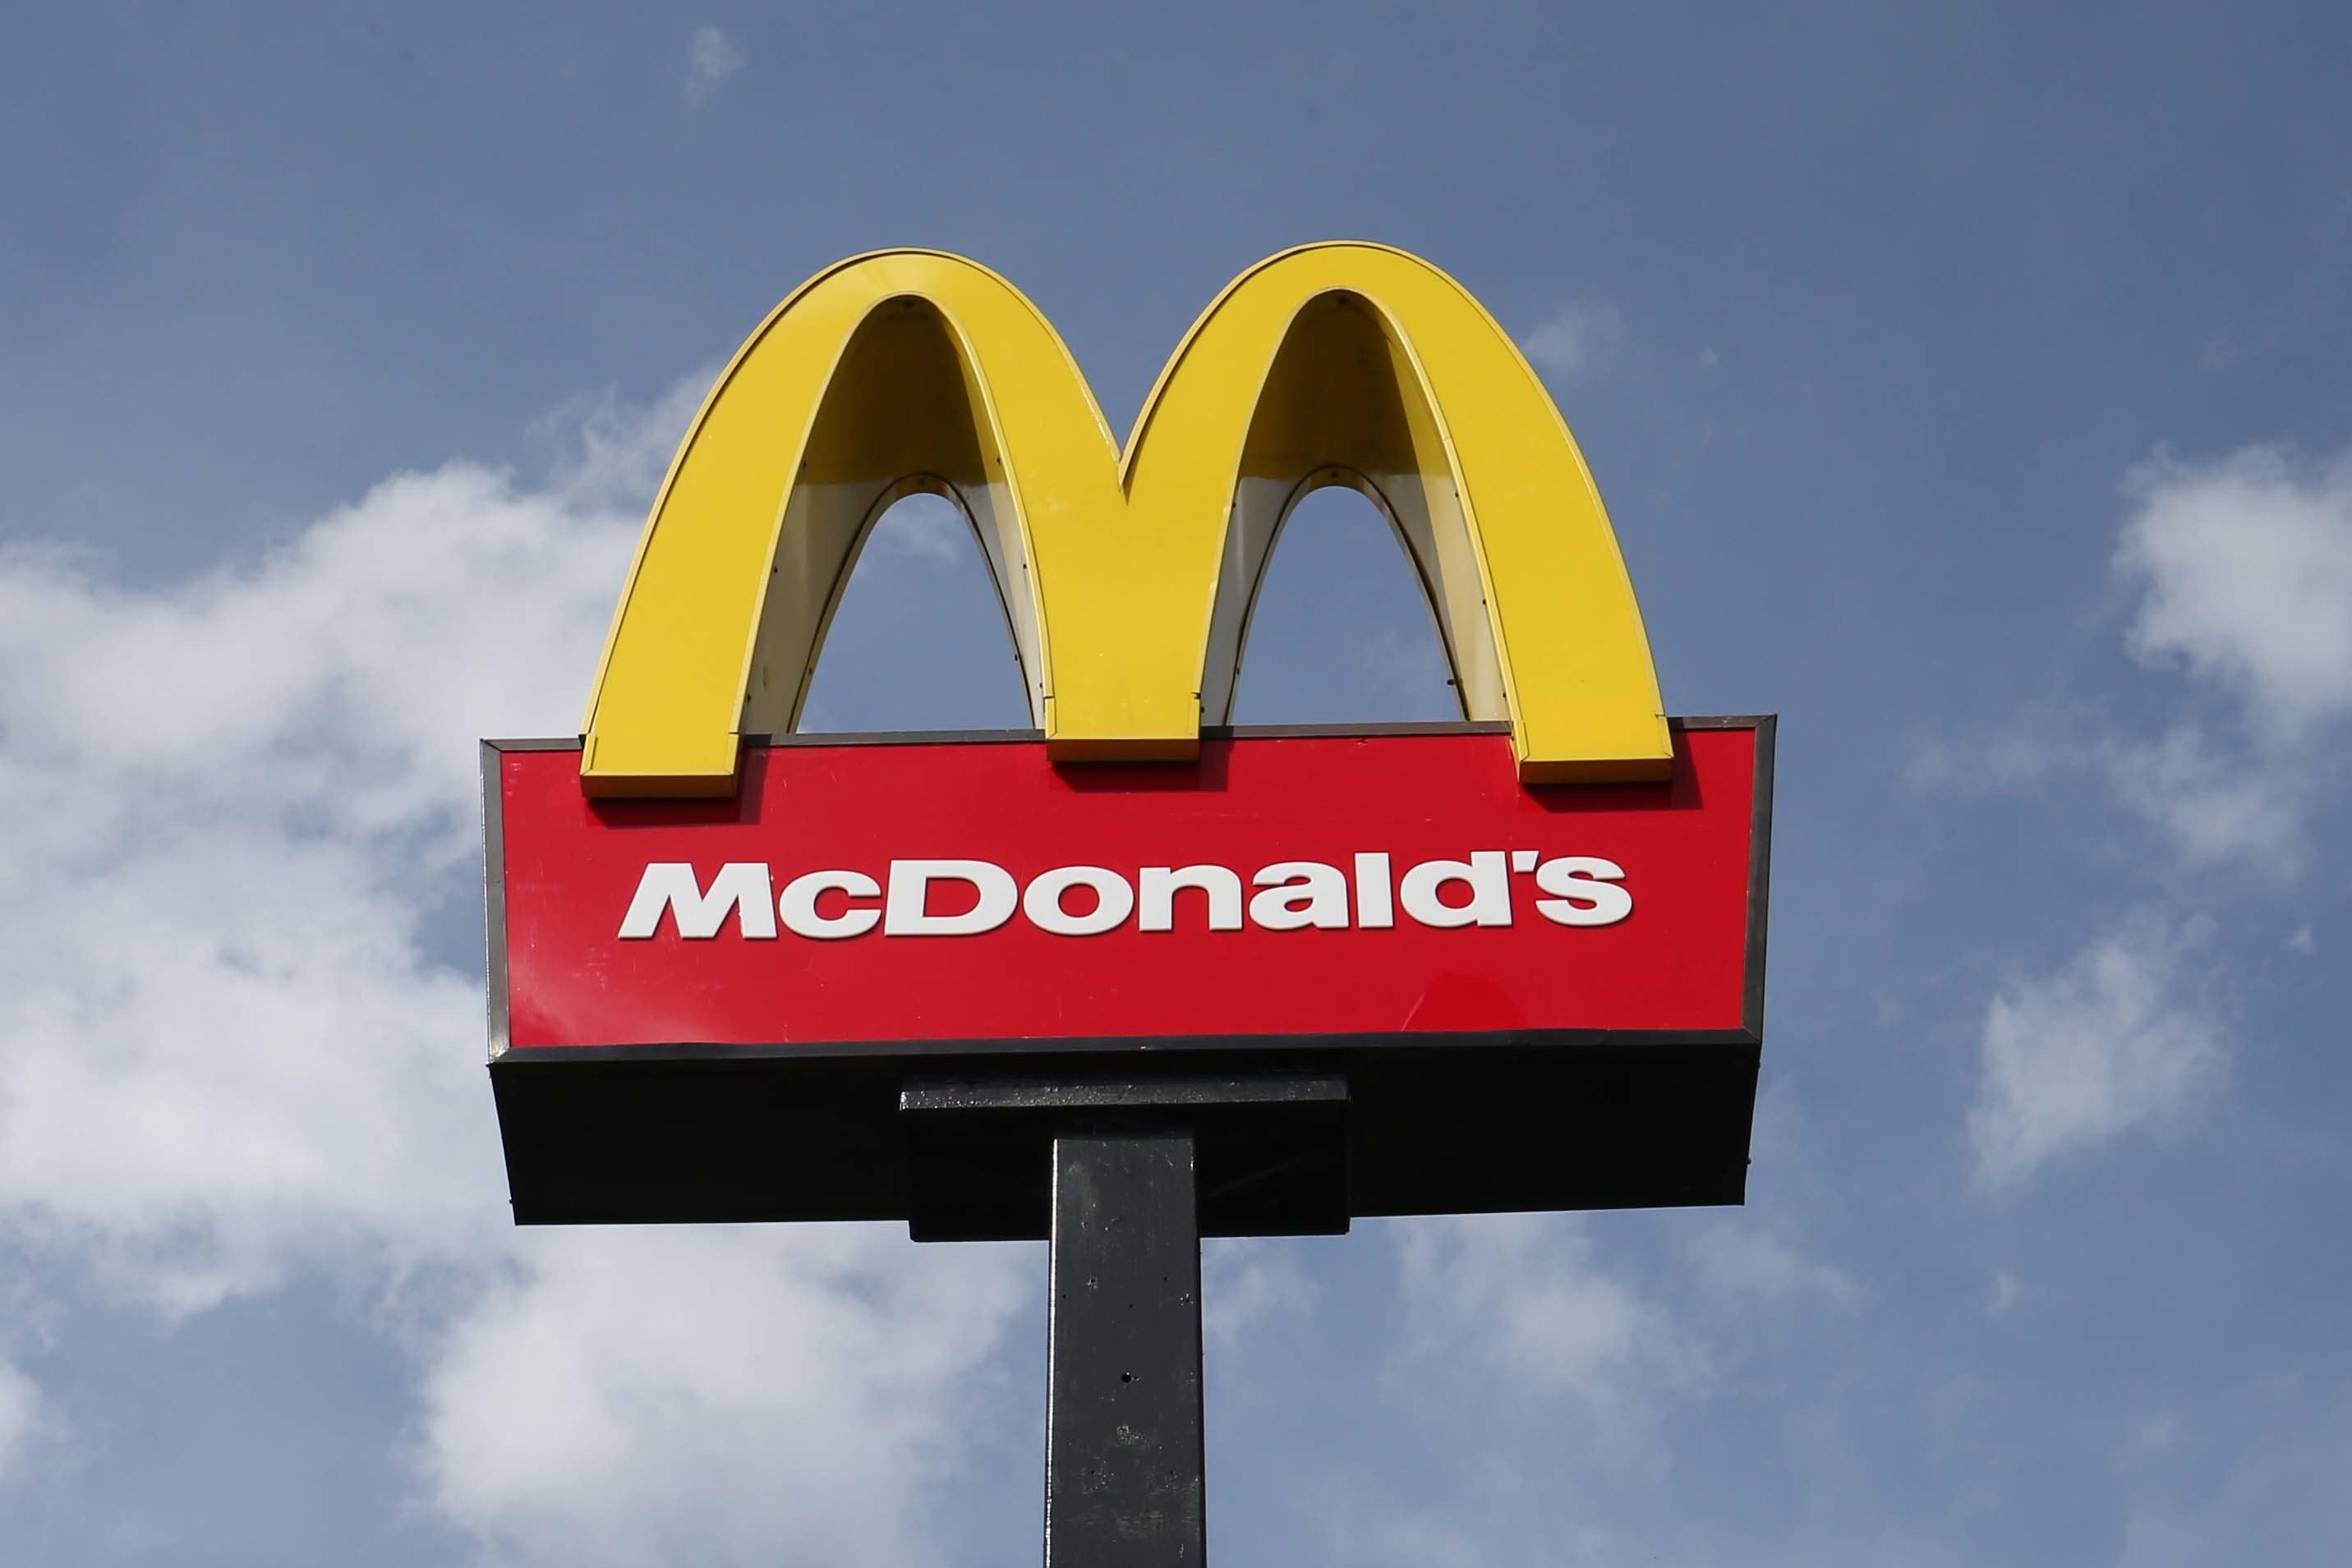 A customer who was burnt by hot coffee has filed a lawsuit against a McDonald’s franchise in San Francisco